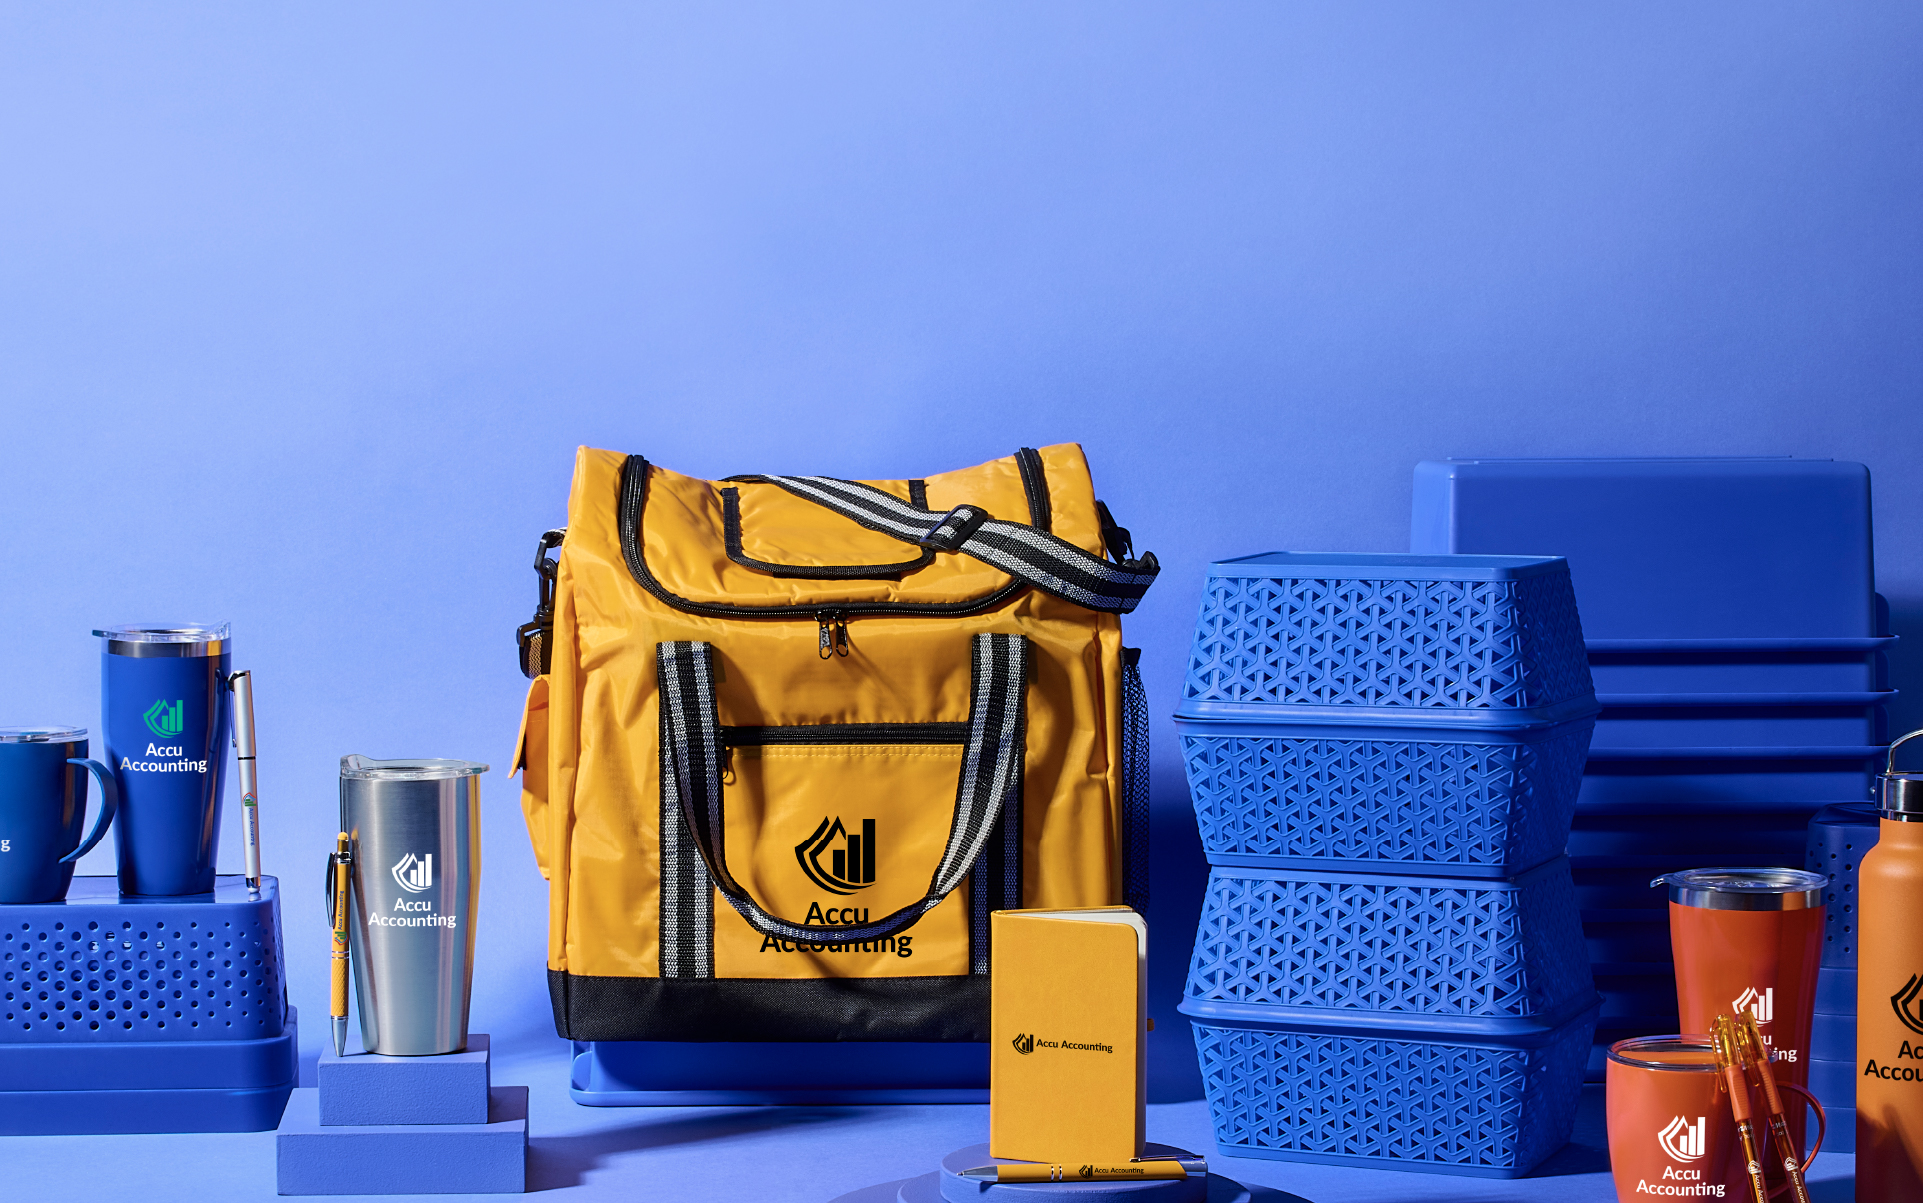 A variety of trade show promotional products on display against a blue background - metal tumblers with logos, orange bags, notebooks, lanyards and water bottles.